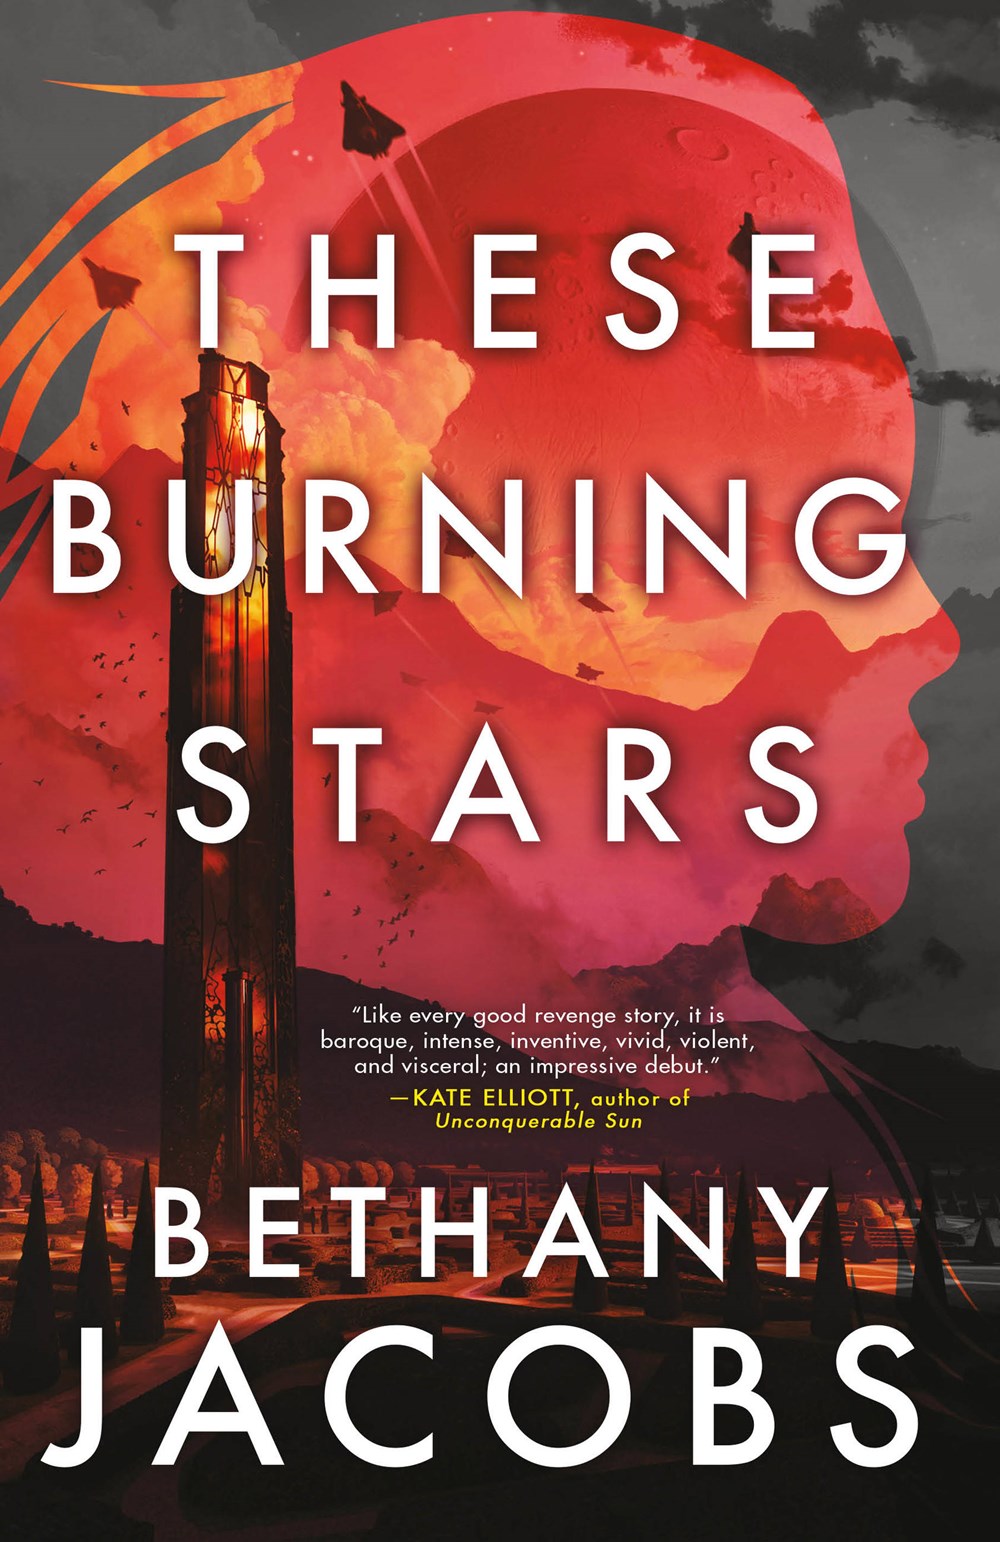 Bethany Jacobs Wins Philip K. Dick Award for ‘These Burning Stars’ | Book Pulse